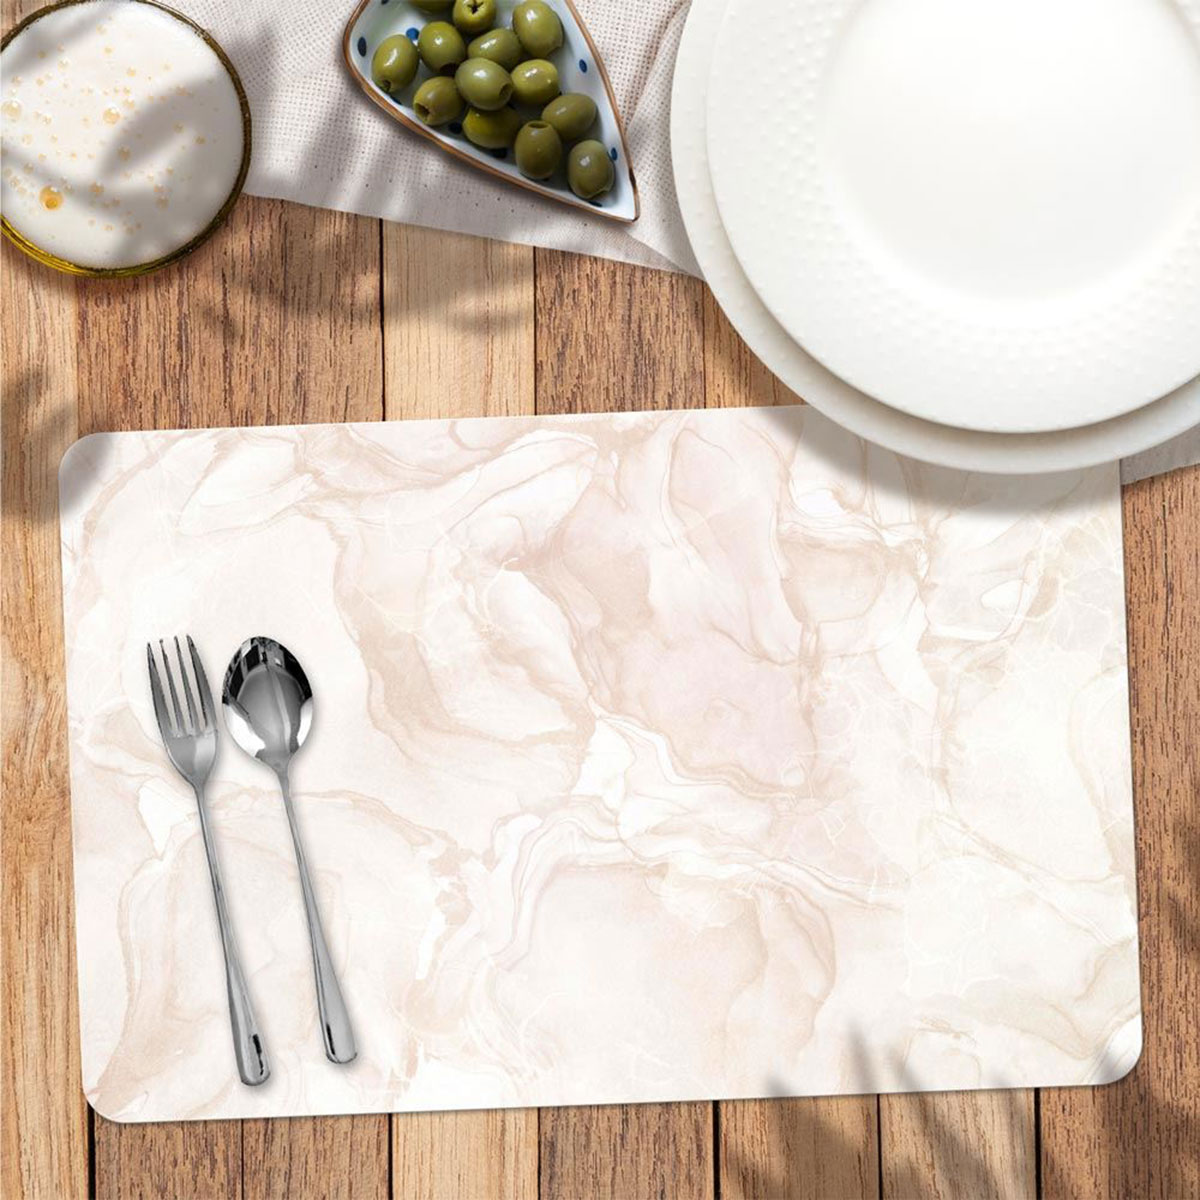 Beige marble look placemat